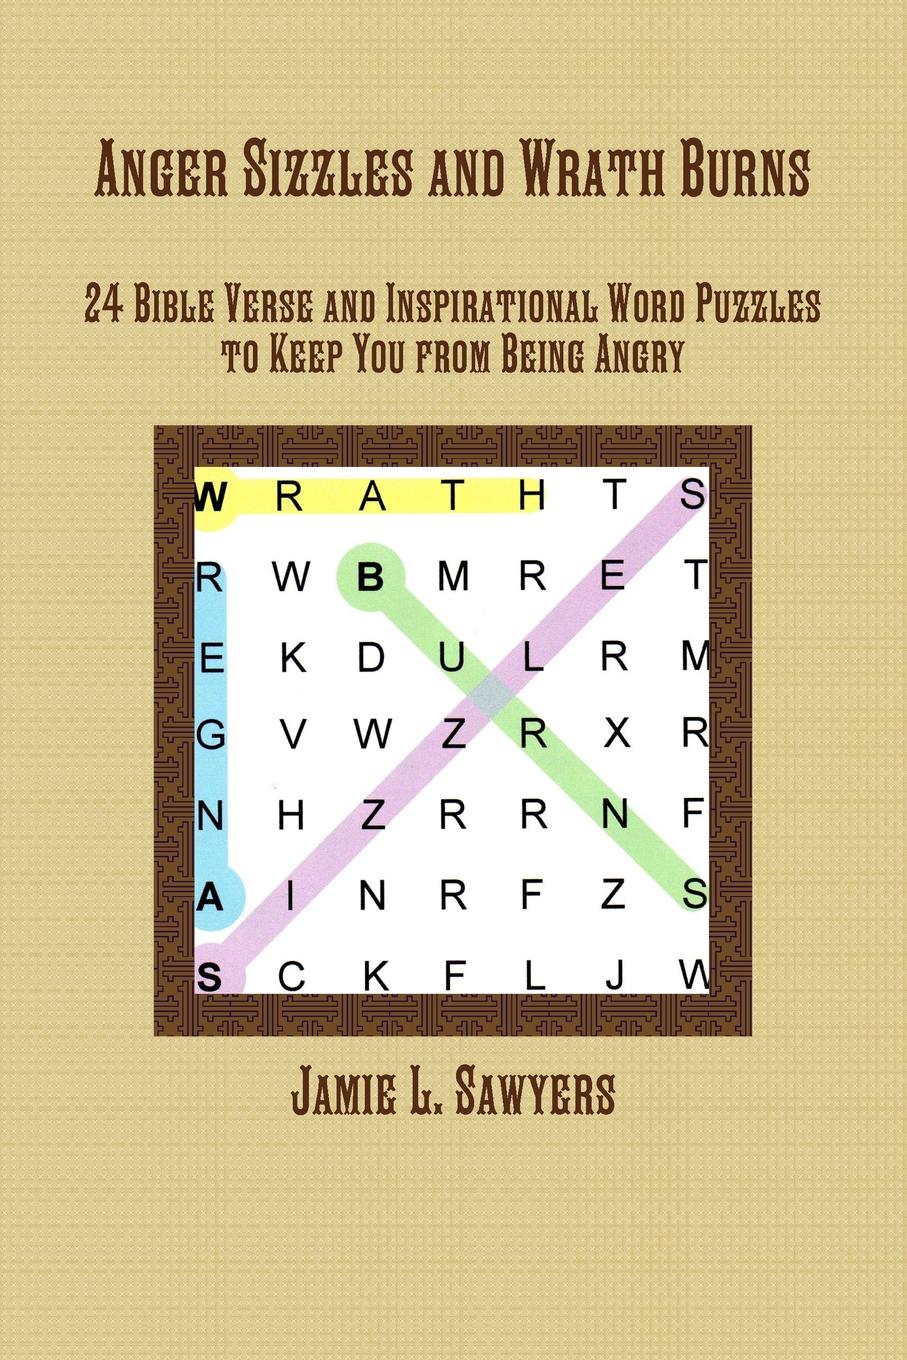 Jamie L. Sawyers Anger Sizzles and Wrath Burns. 24 Bible Verse and Inspirational Word Puzzles to Keep You from Being Angry